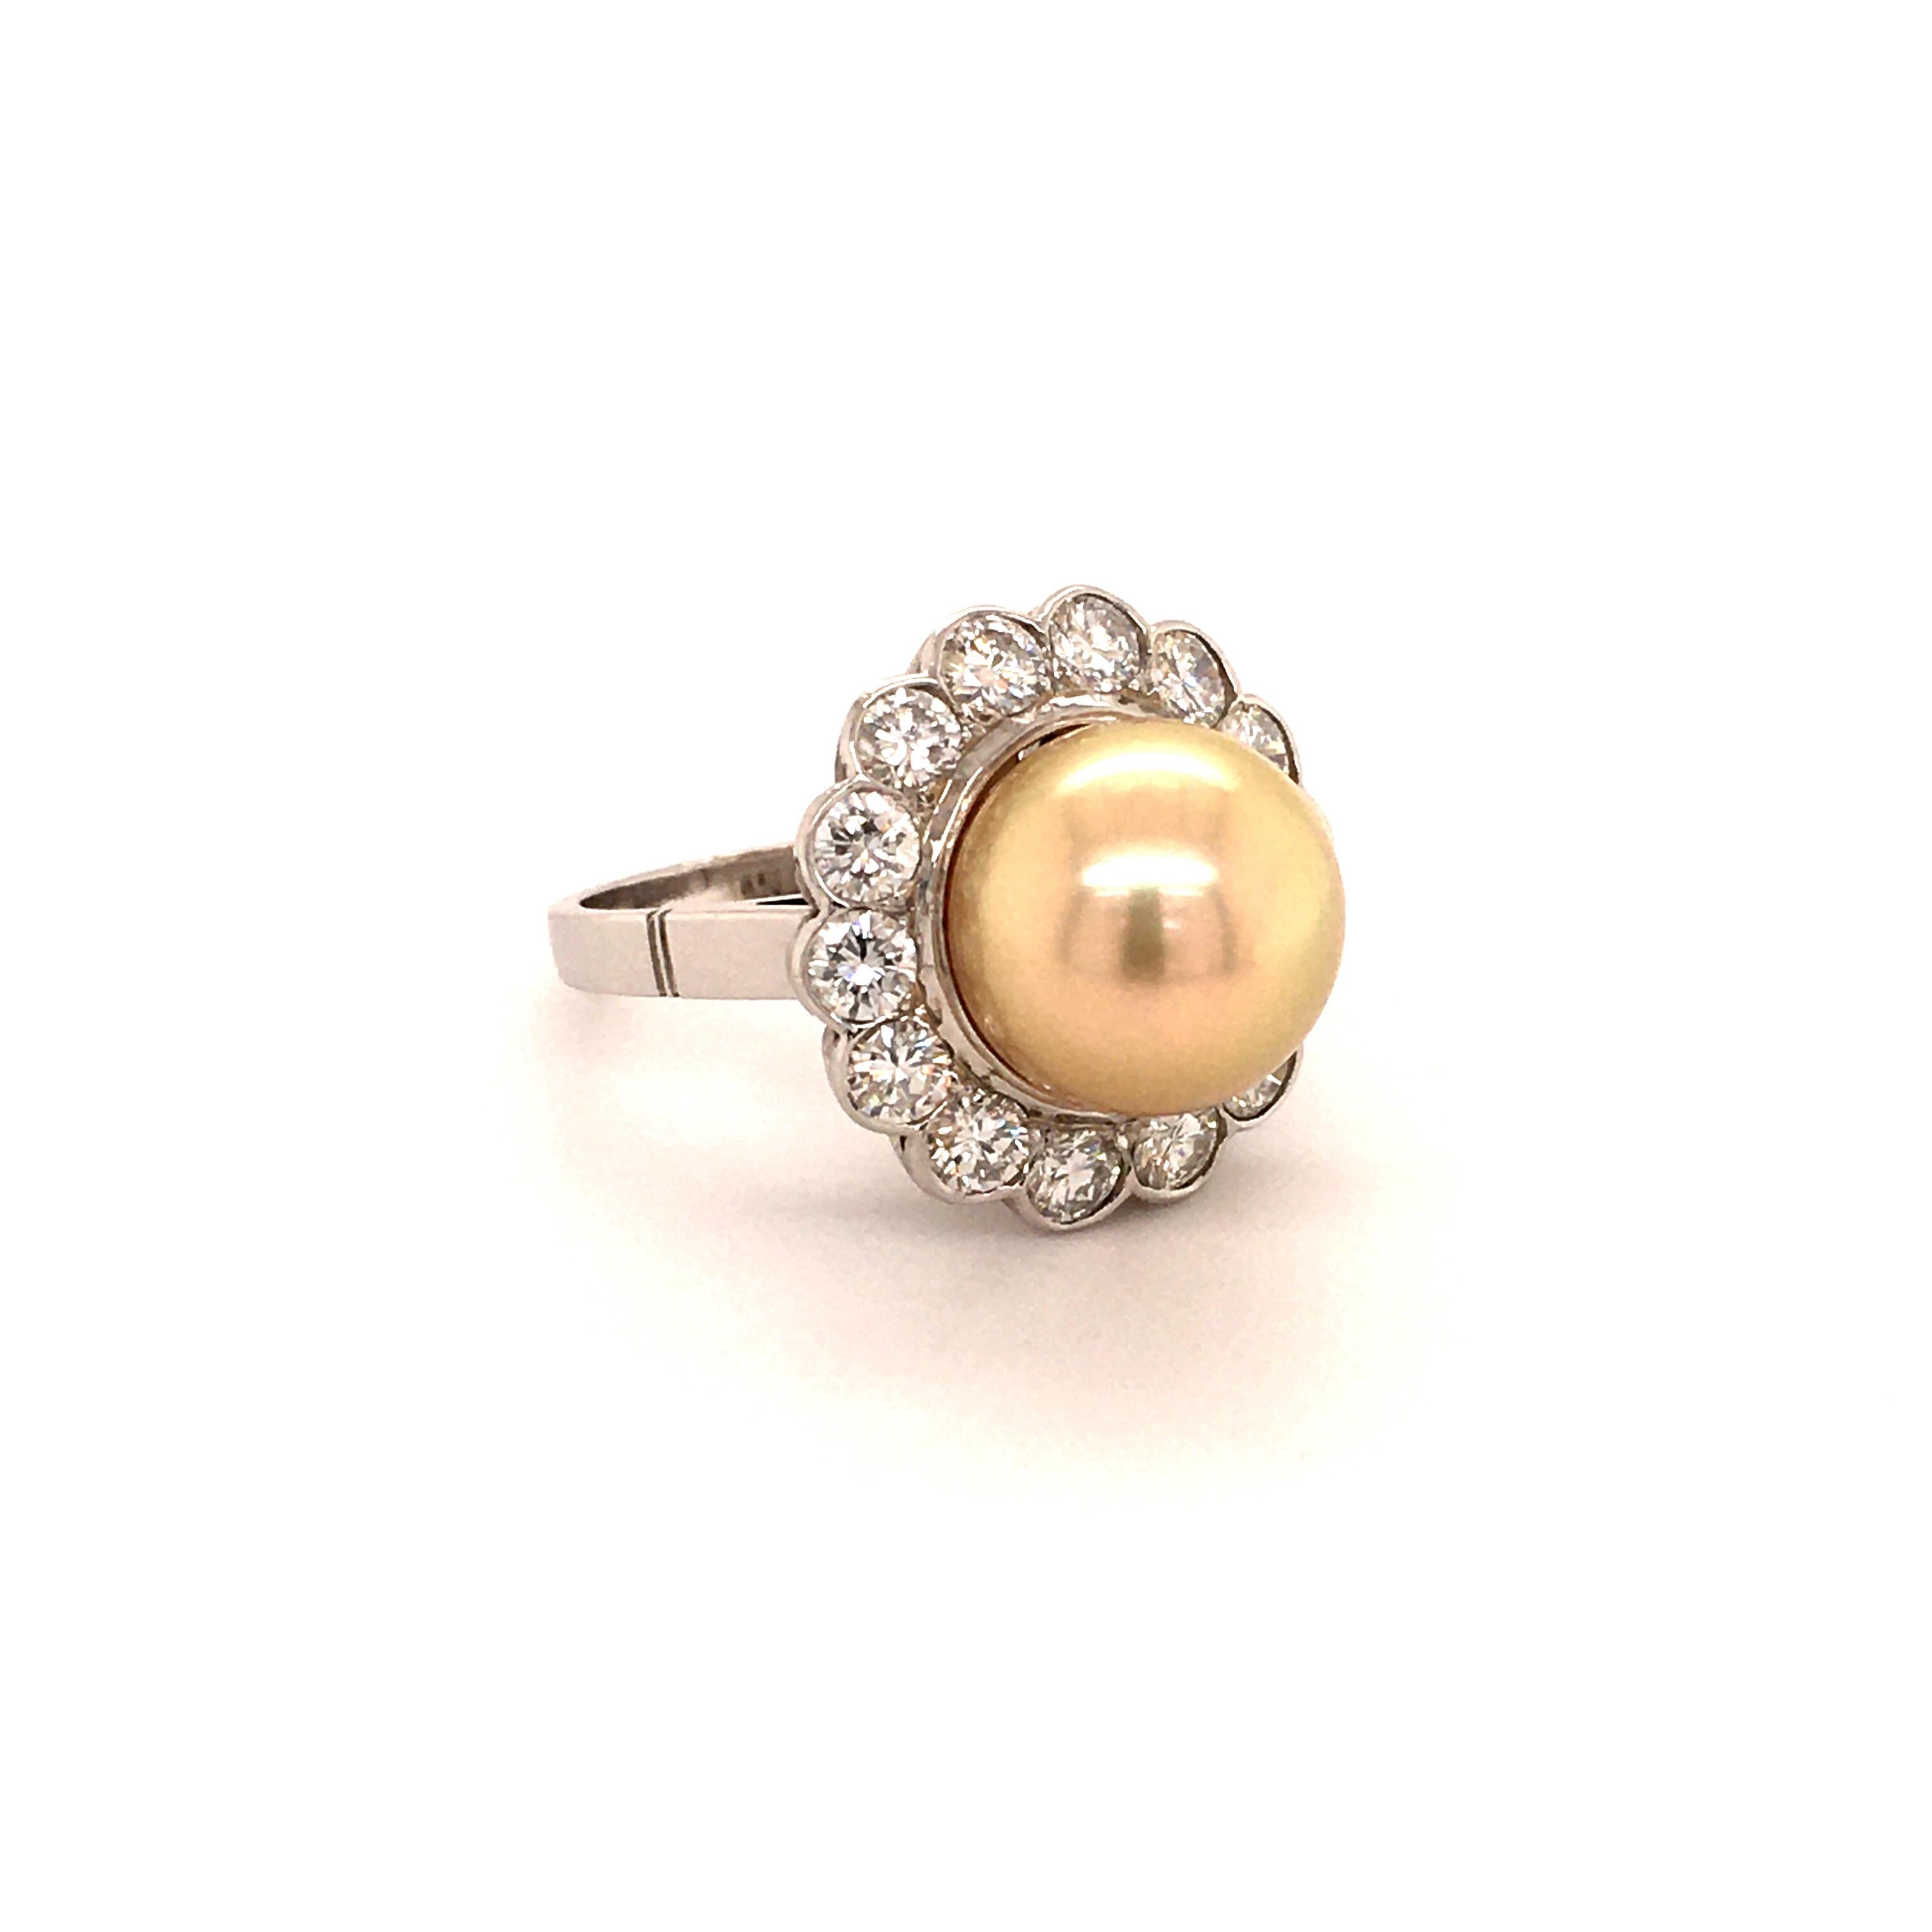 This elegant ring in 14 karat white gold features a beautiful gold colored, round South Sea cultured pearl of 12.0 mm in diameter. The surface of the pearl is clean with an excellent luster. Surrounded by 14 brilliant cut diamonds of G/H color and